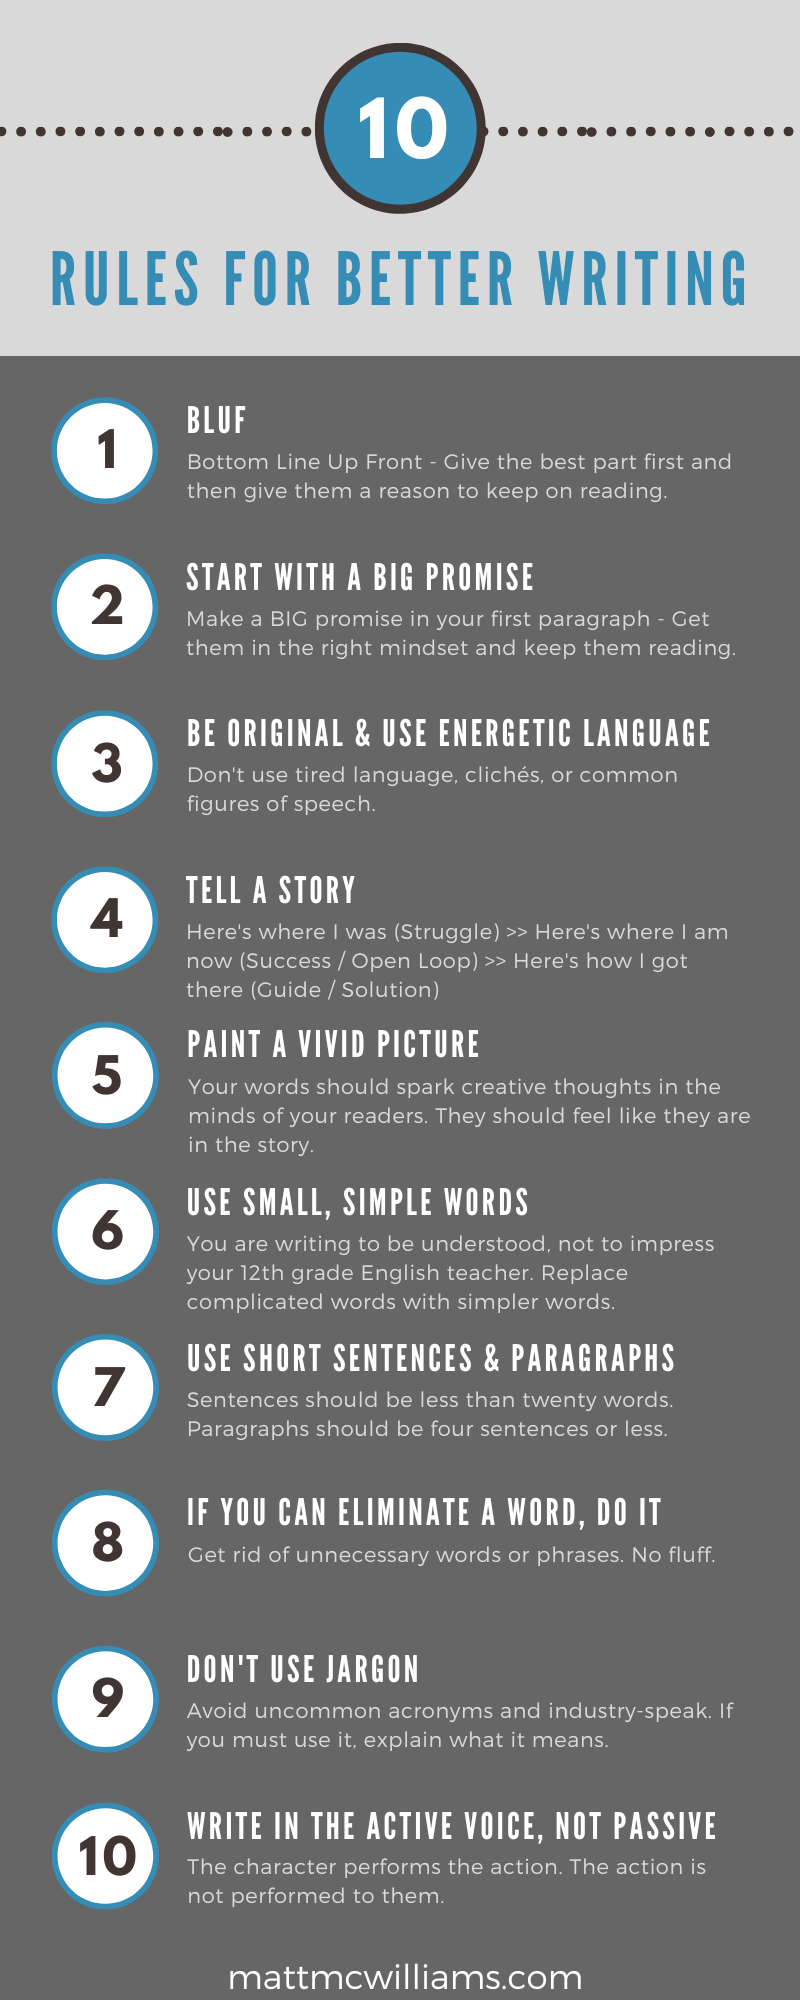 Rules for writing from Orwell, Luntz, and others